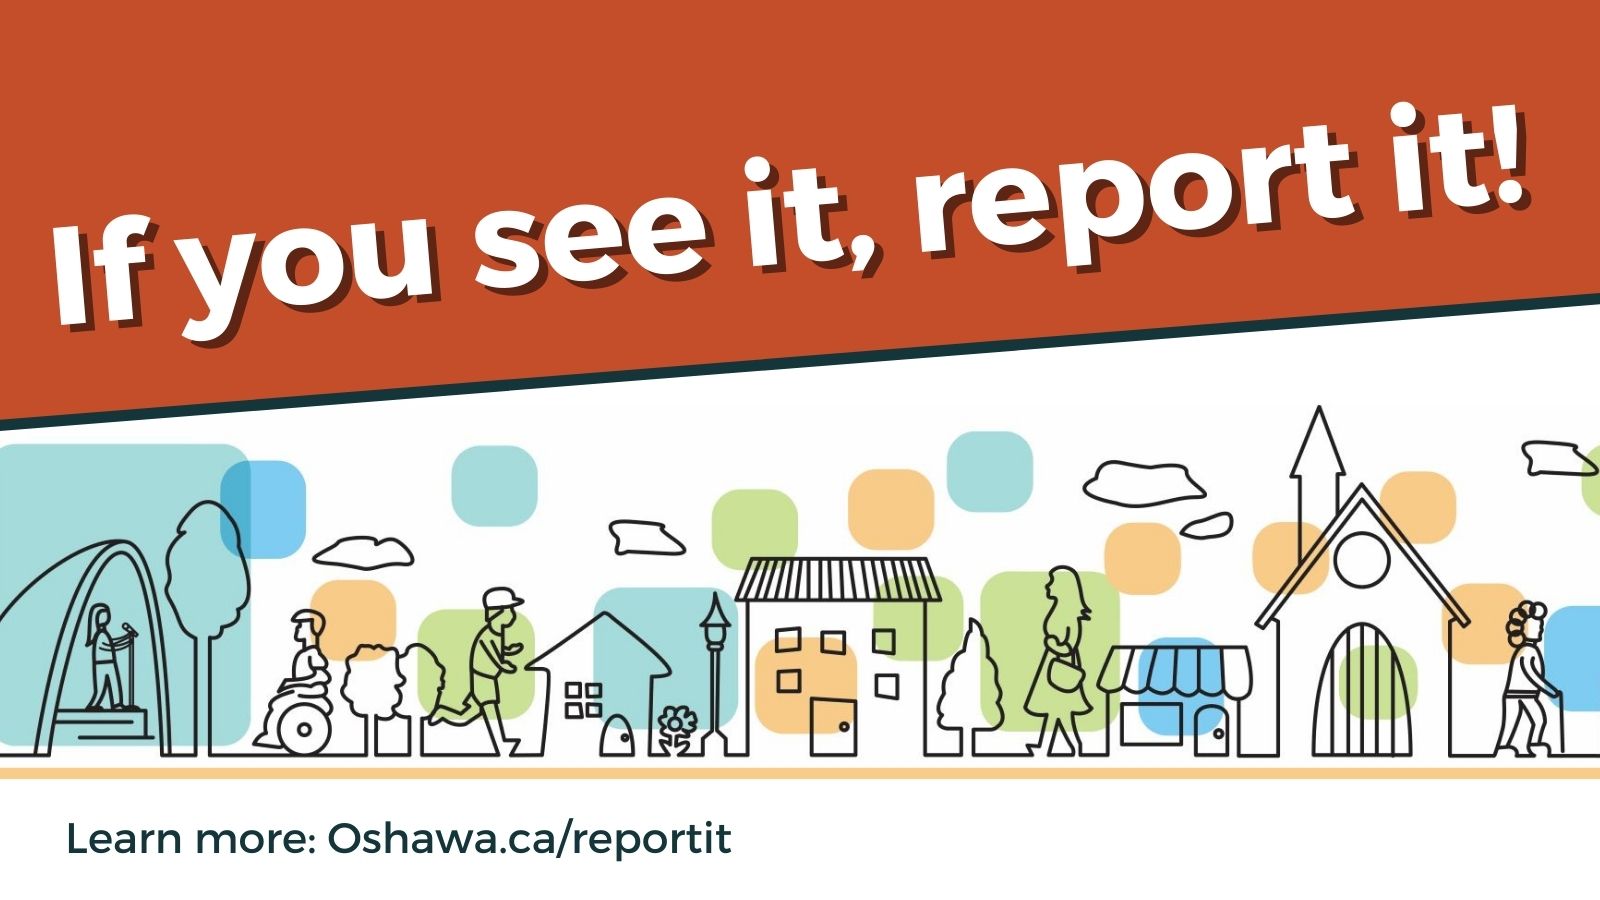 If you see it, report it - illustration of buildings and people on the street